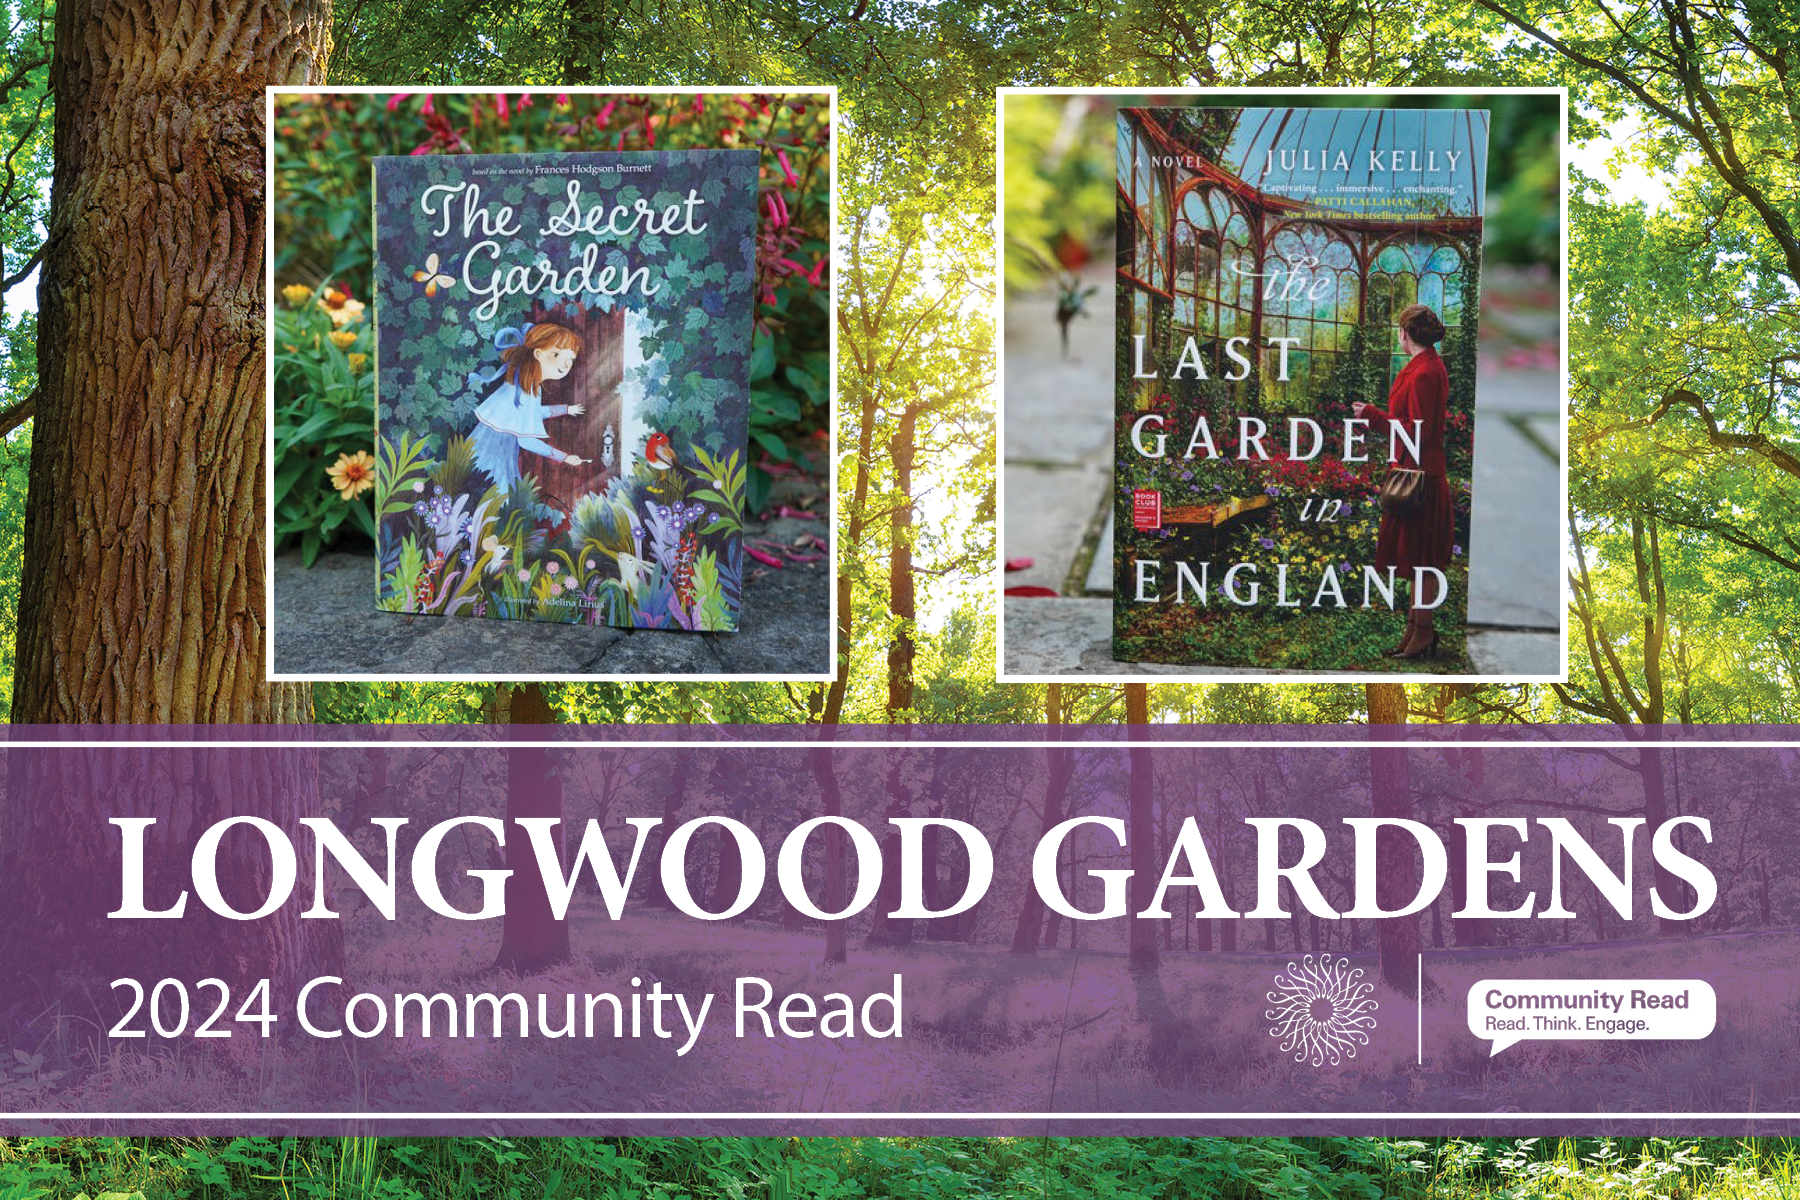 background image of trees with images of book covers for The Secret Garden and The Last Library in England above "Longwood Gardens 2024 Community Read"